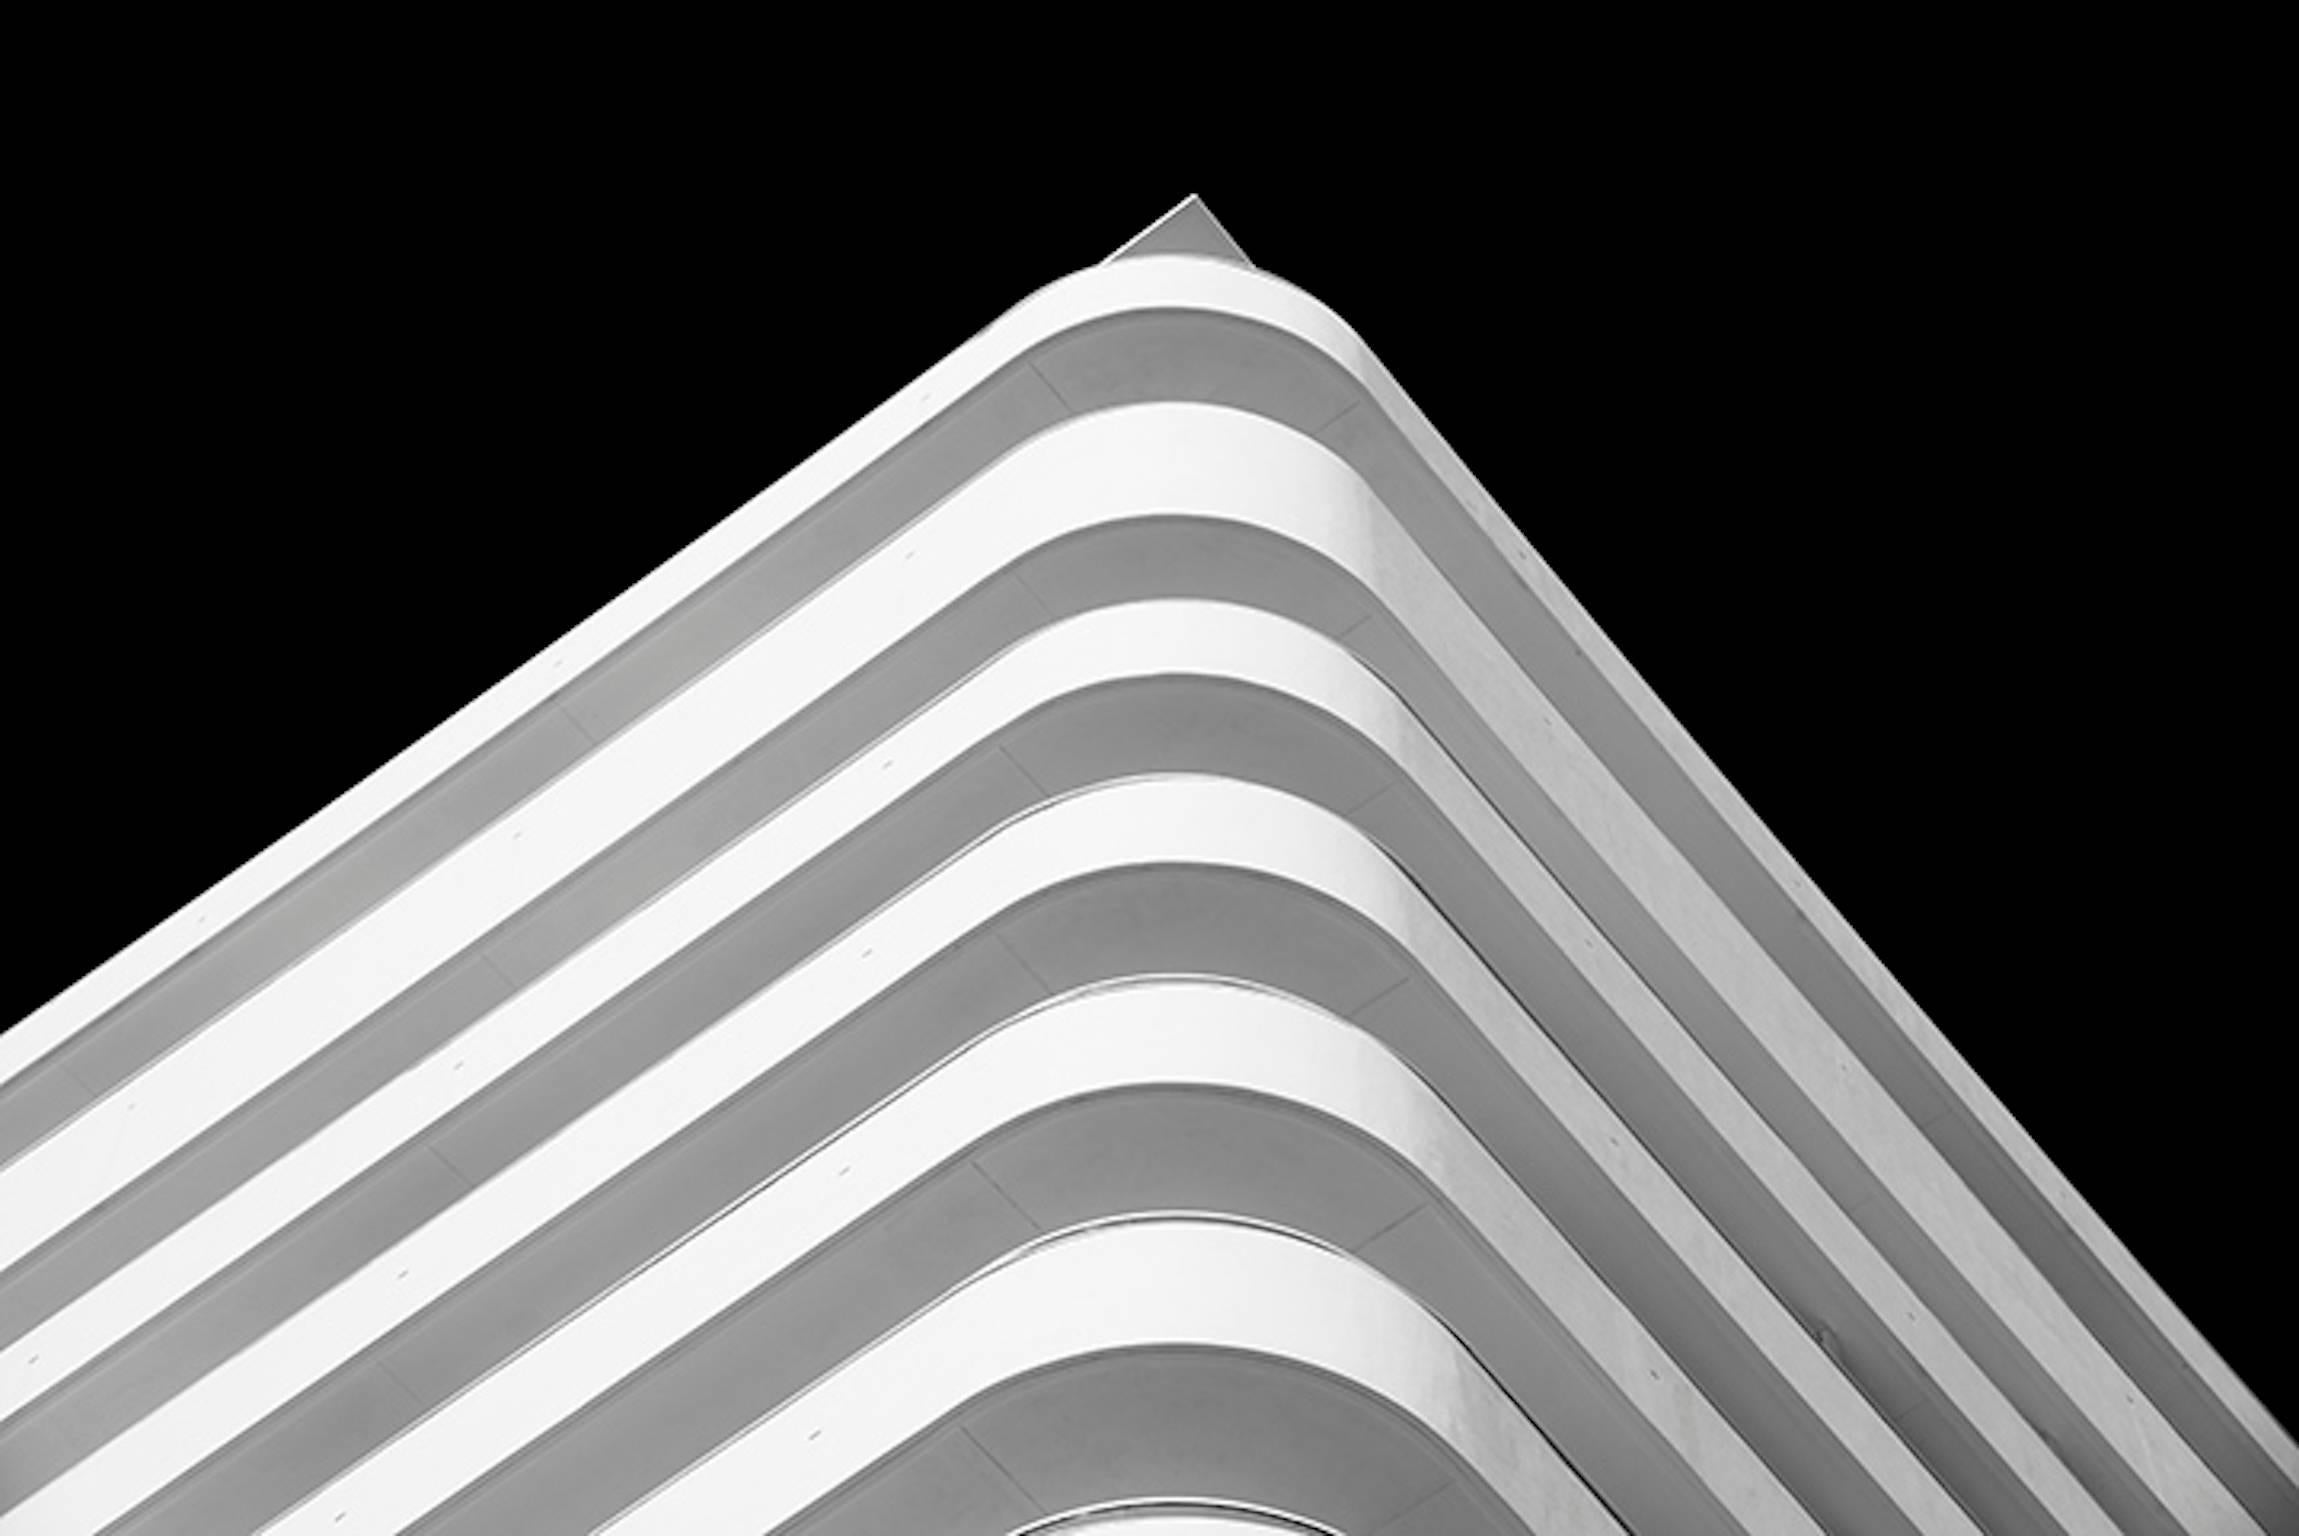 Miami Stripes, Black and White by Luca Artioli
Archival Pigment Print
size: 27" x 40"
Edition of 5 + 1AP
2016.

Miami Skin is one of the few “Still photo” projects realized only in Black and White. It’s not a traditional collection of photos of the